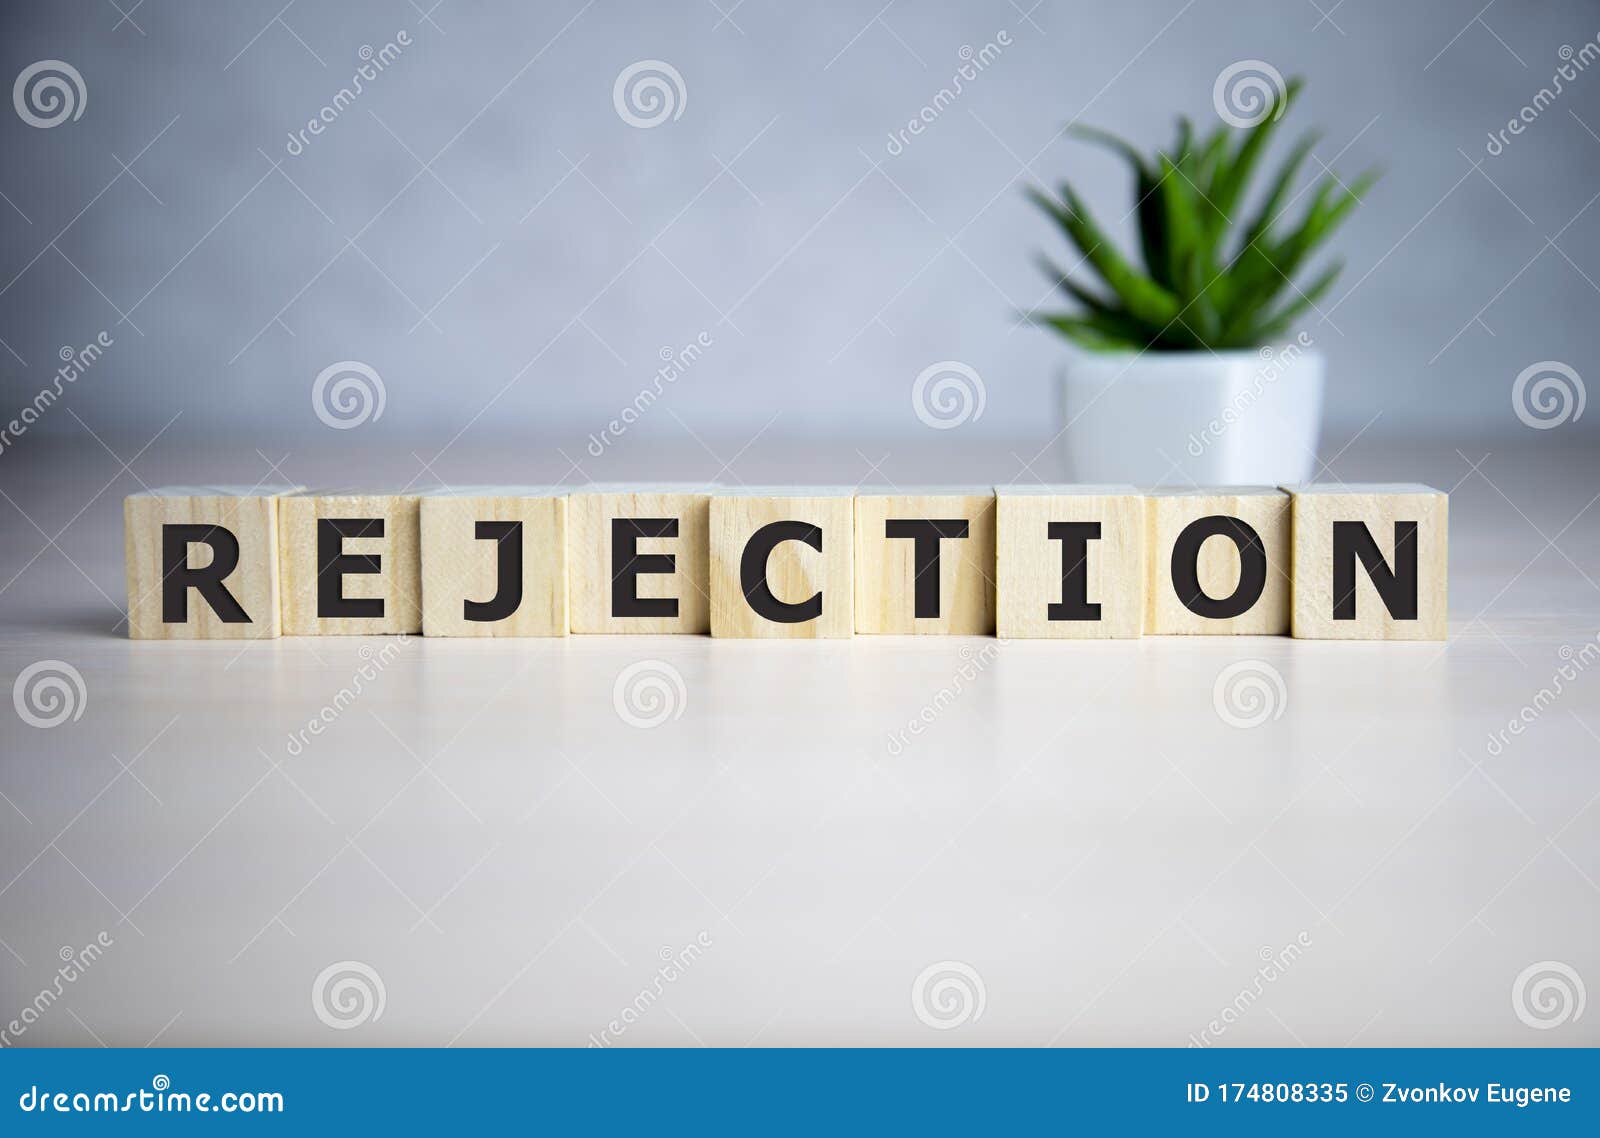 the word rejection, spelt with wooden letter tiles over a blue background